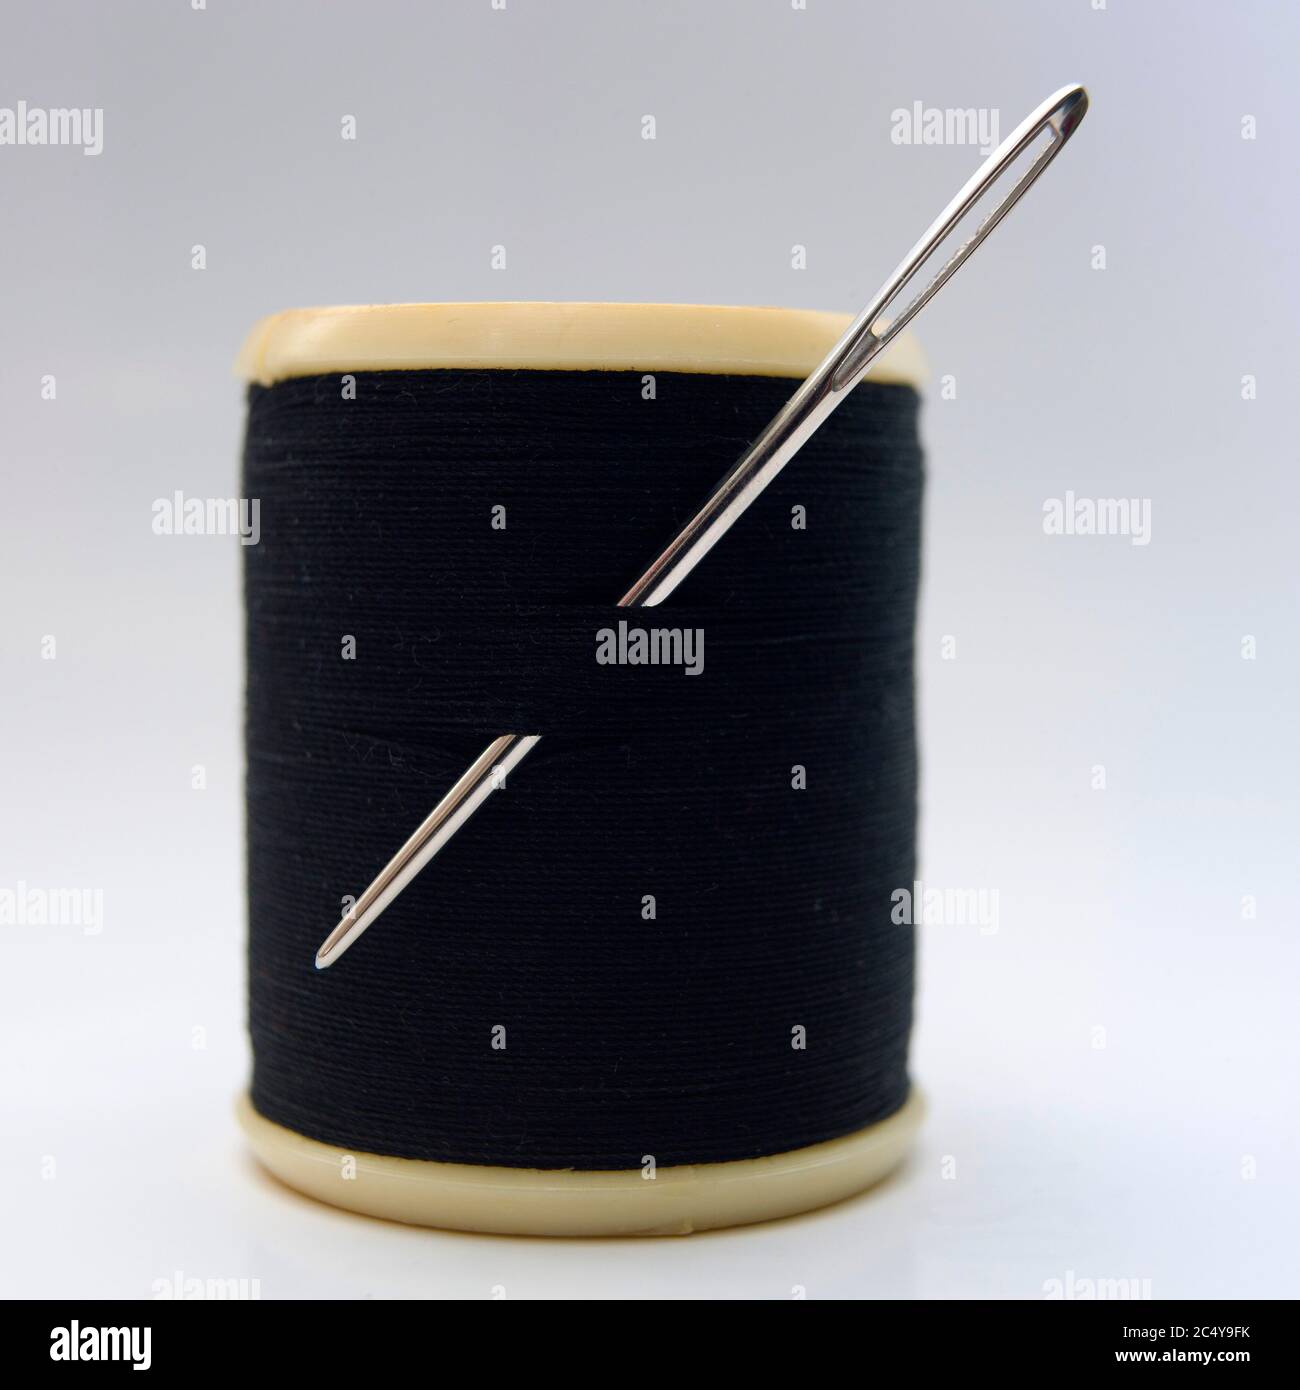 Sewing Needle With Black Thread Stuck In Wooden Spool With Black Threads  Close Up Isolated On White Background Stock Photo - Download Image Now -  iStock